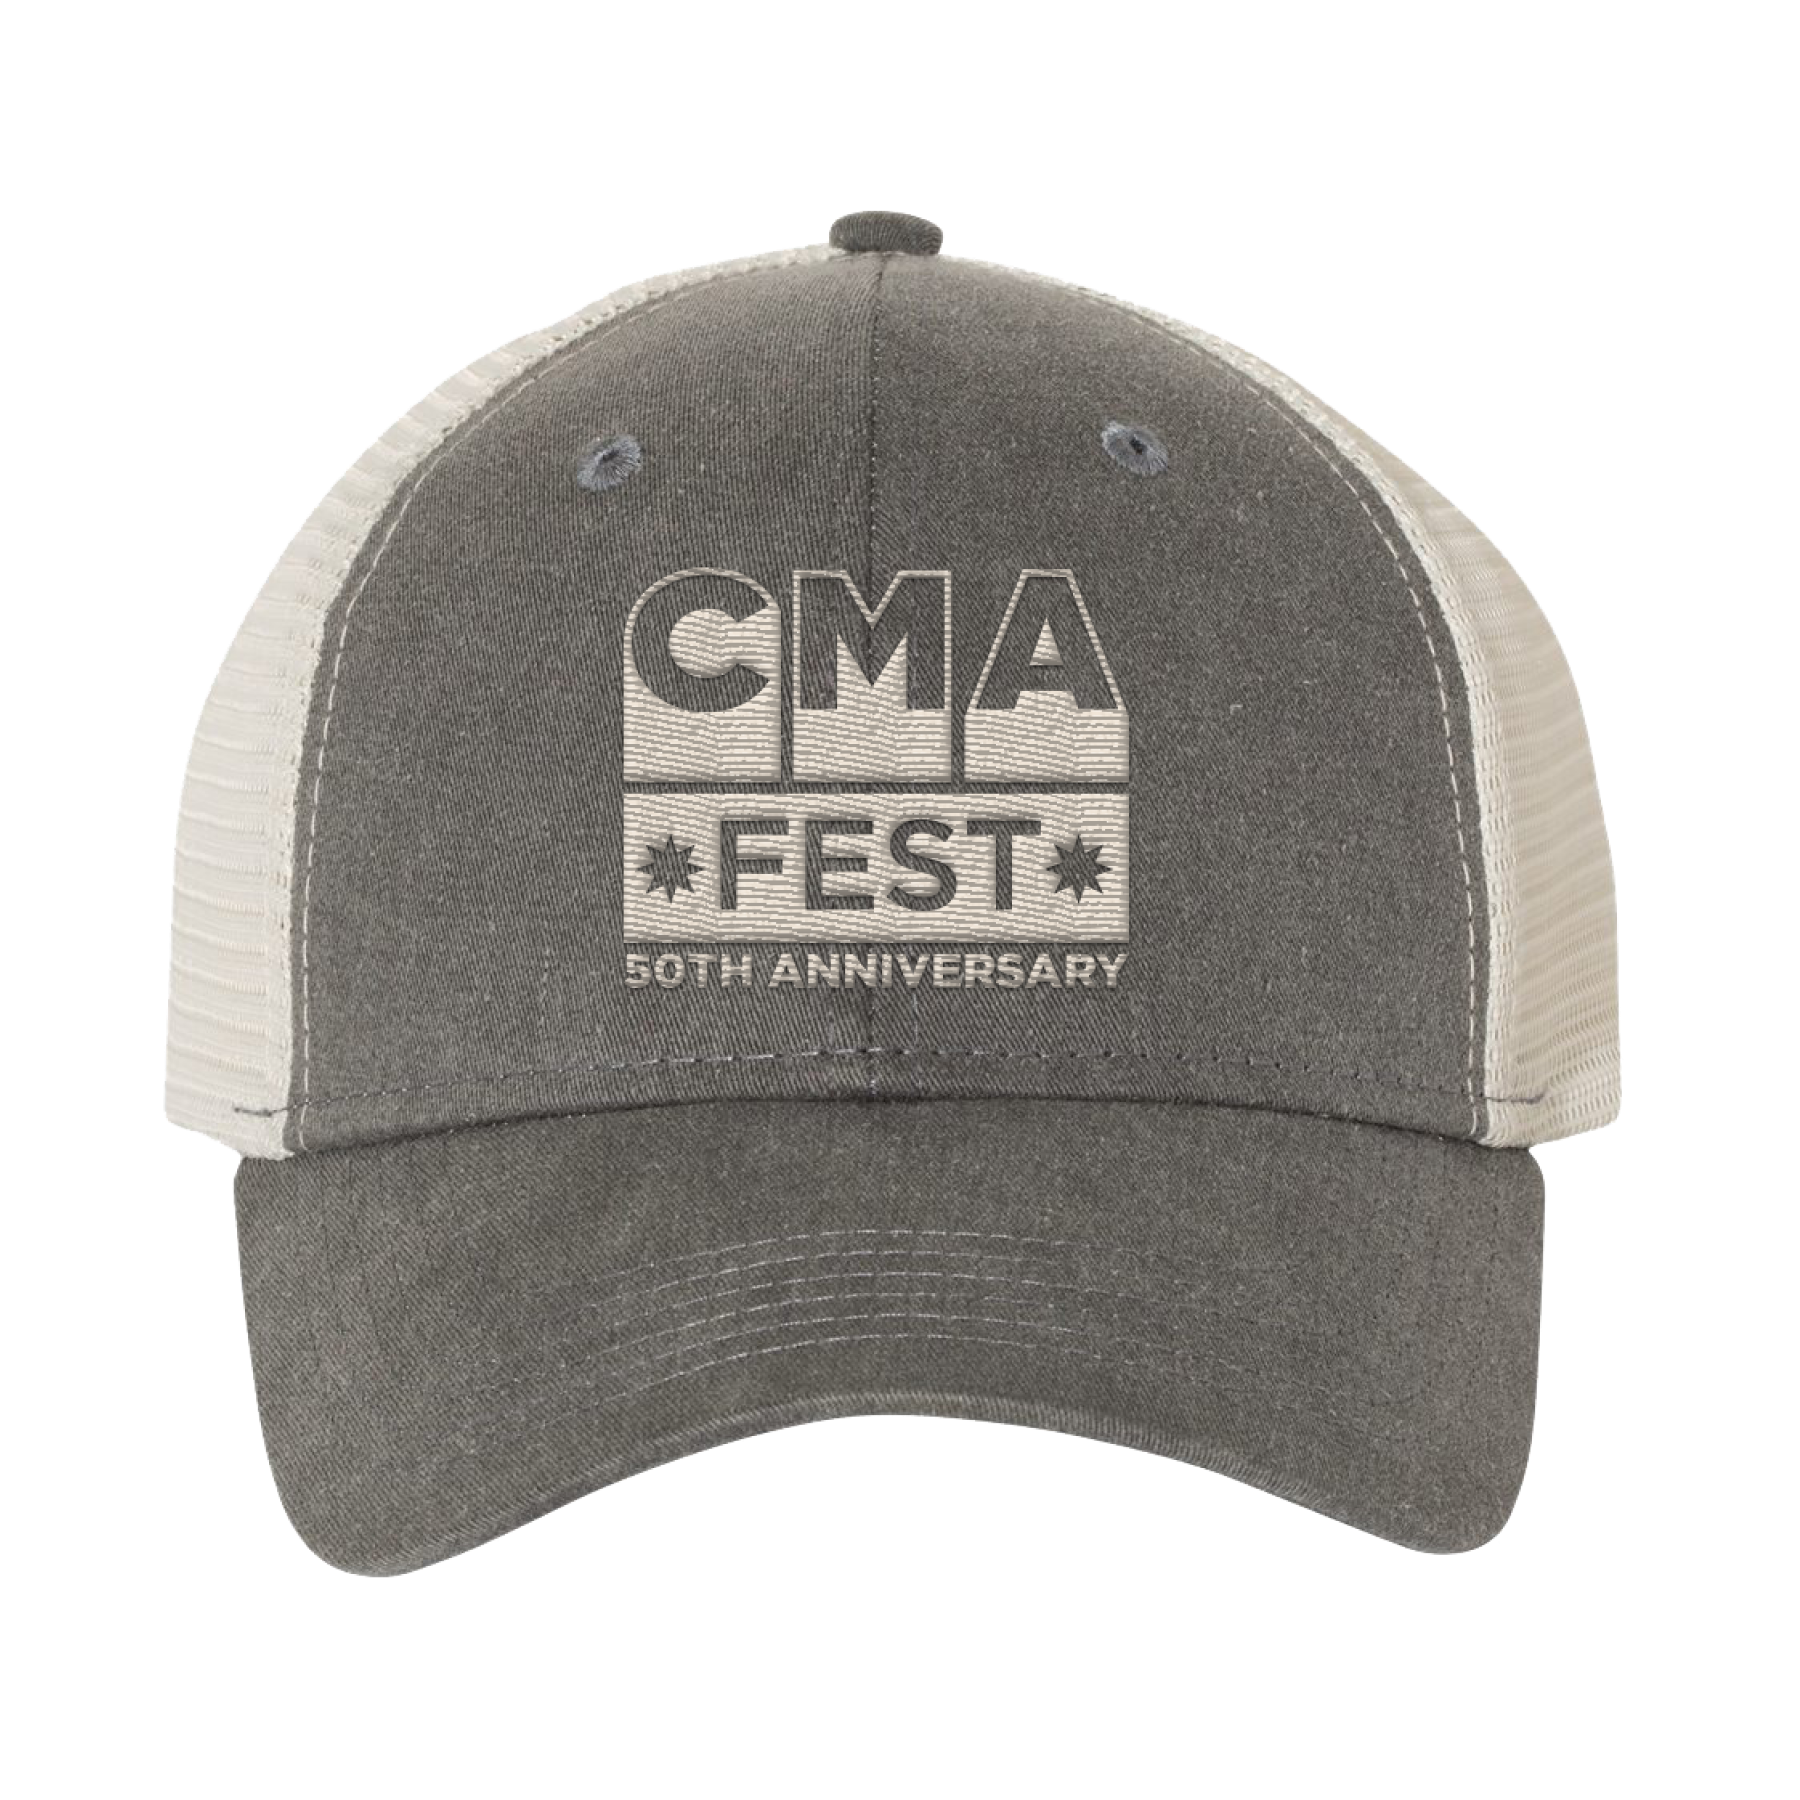 Official CMA Fest Merchandise. Grey hat with CMA Logo embroidered